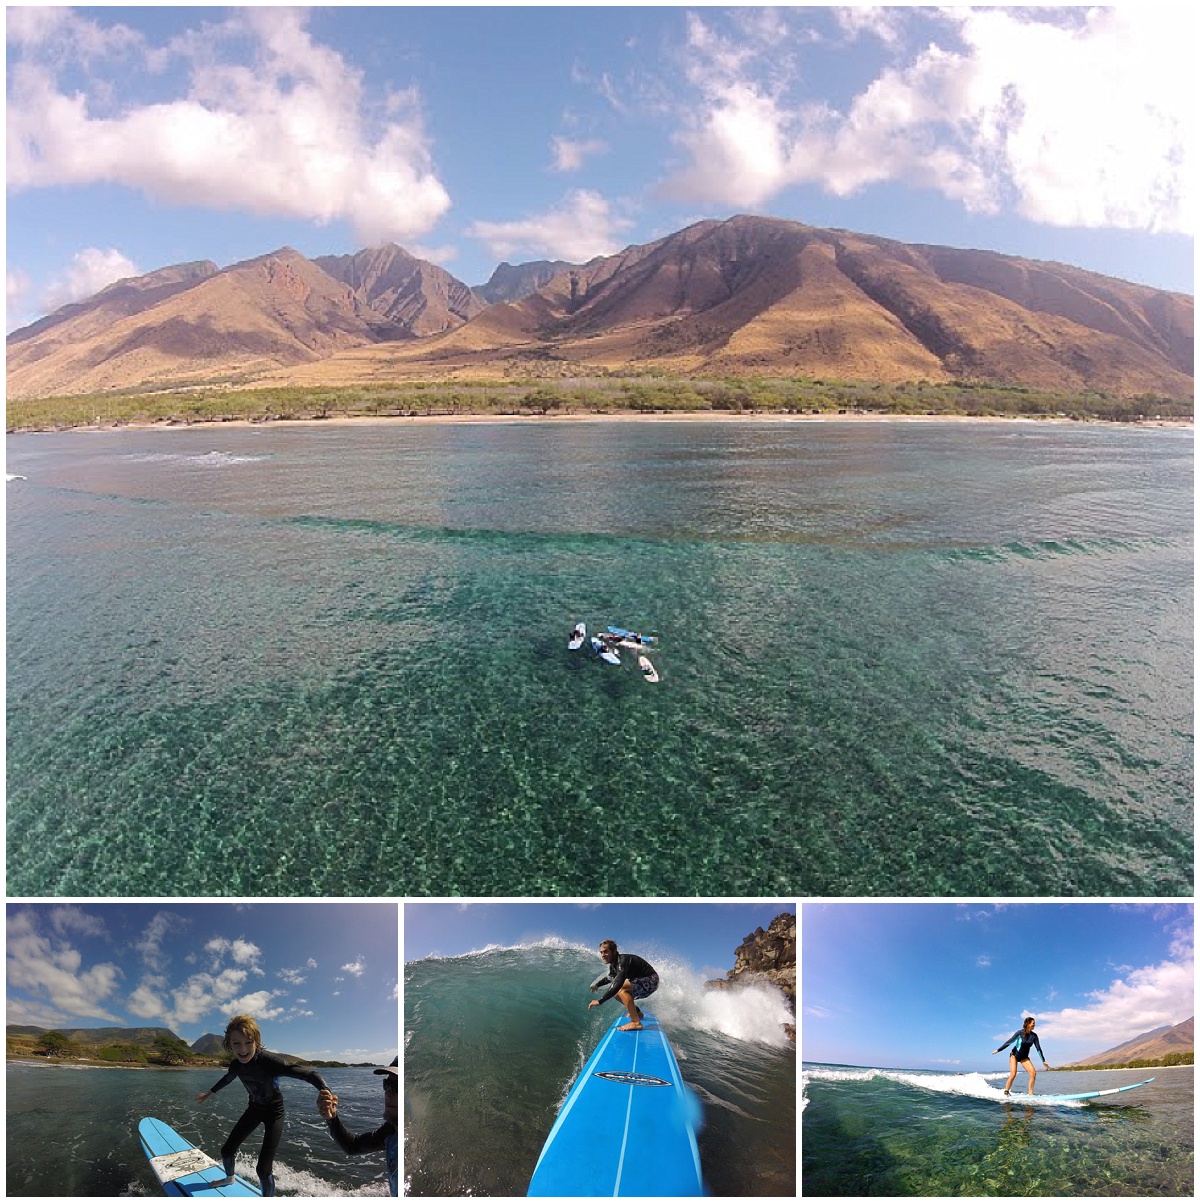 Maui Surfing | Photos, Lessons & Local Tips for Surfing in Maui